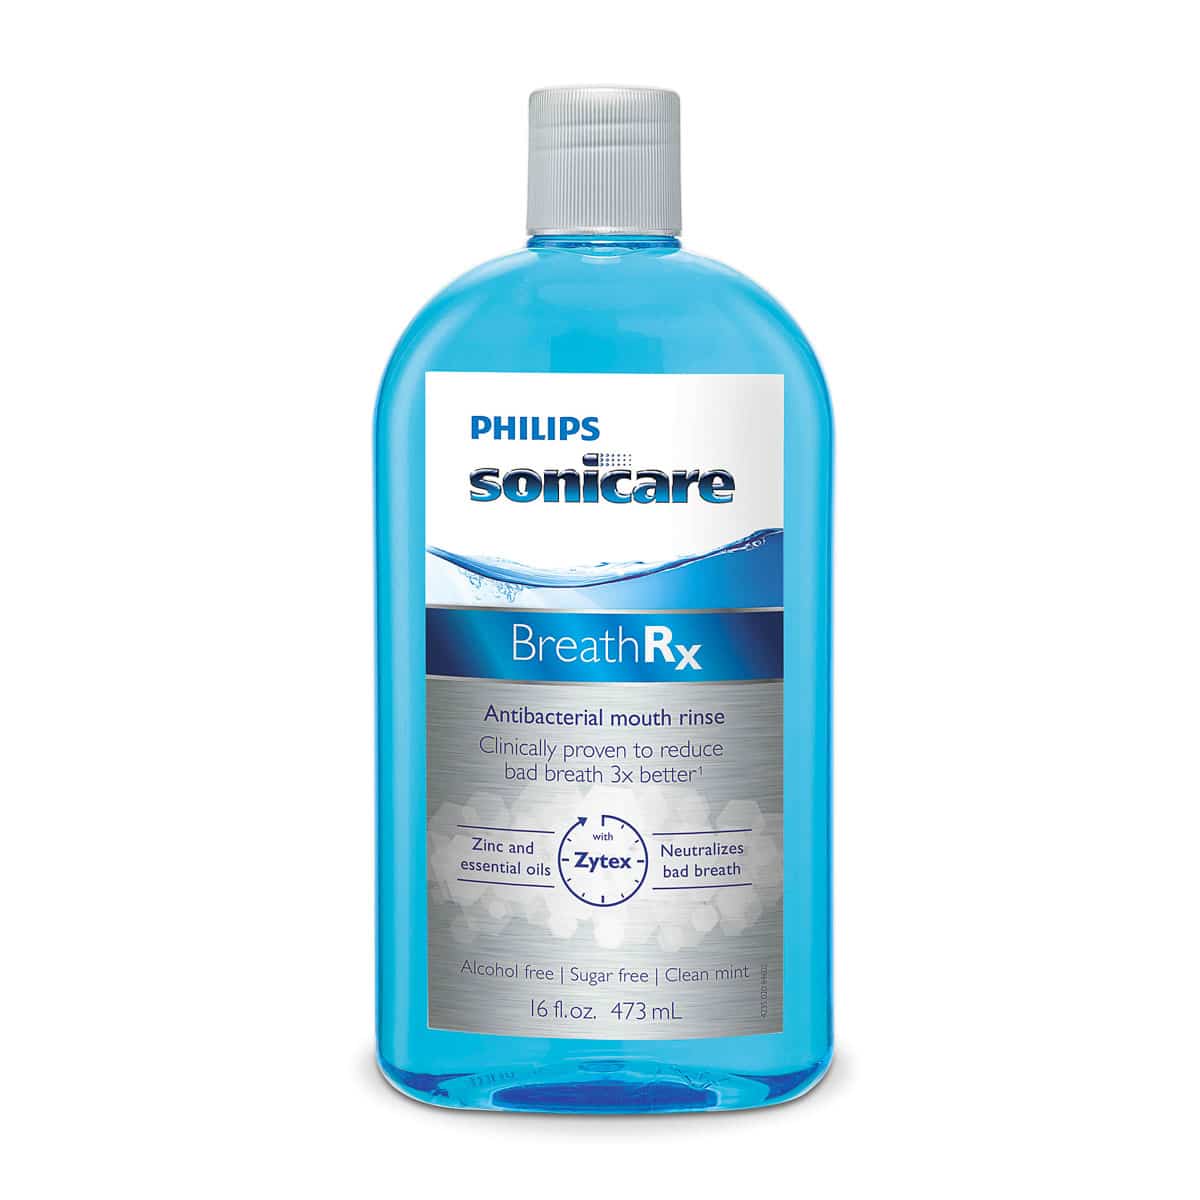 Philips Sonicare BreathRx Antibacterial Mouth Rinse (16 Fl. Oz. Bottle)